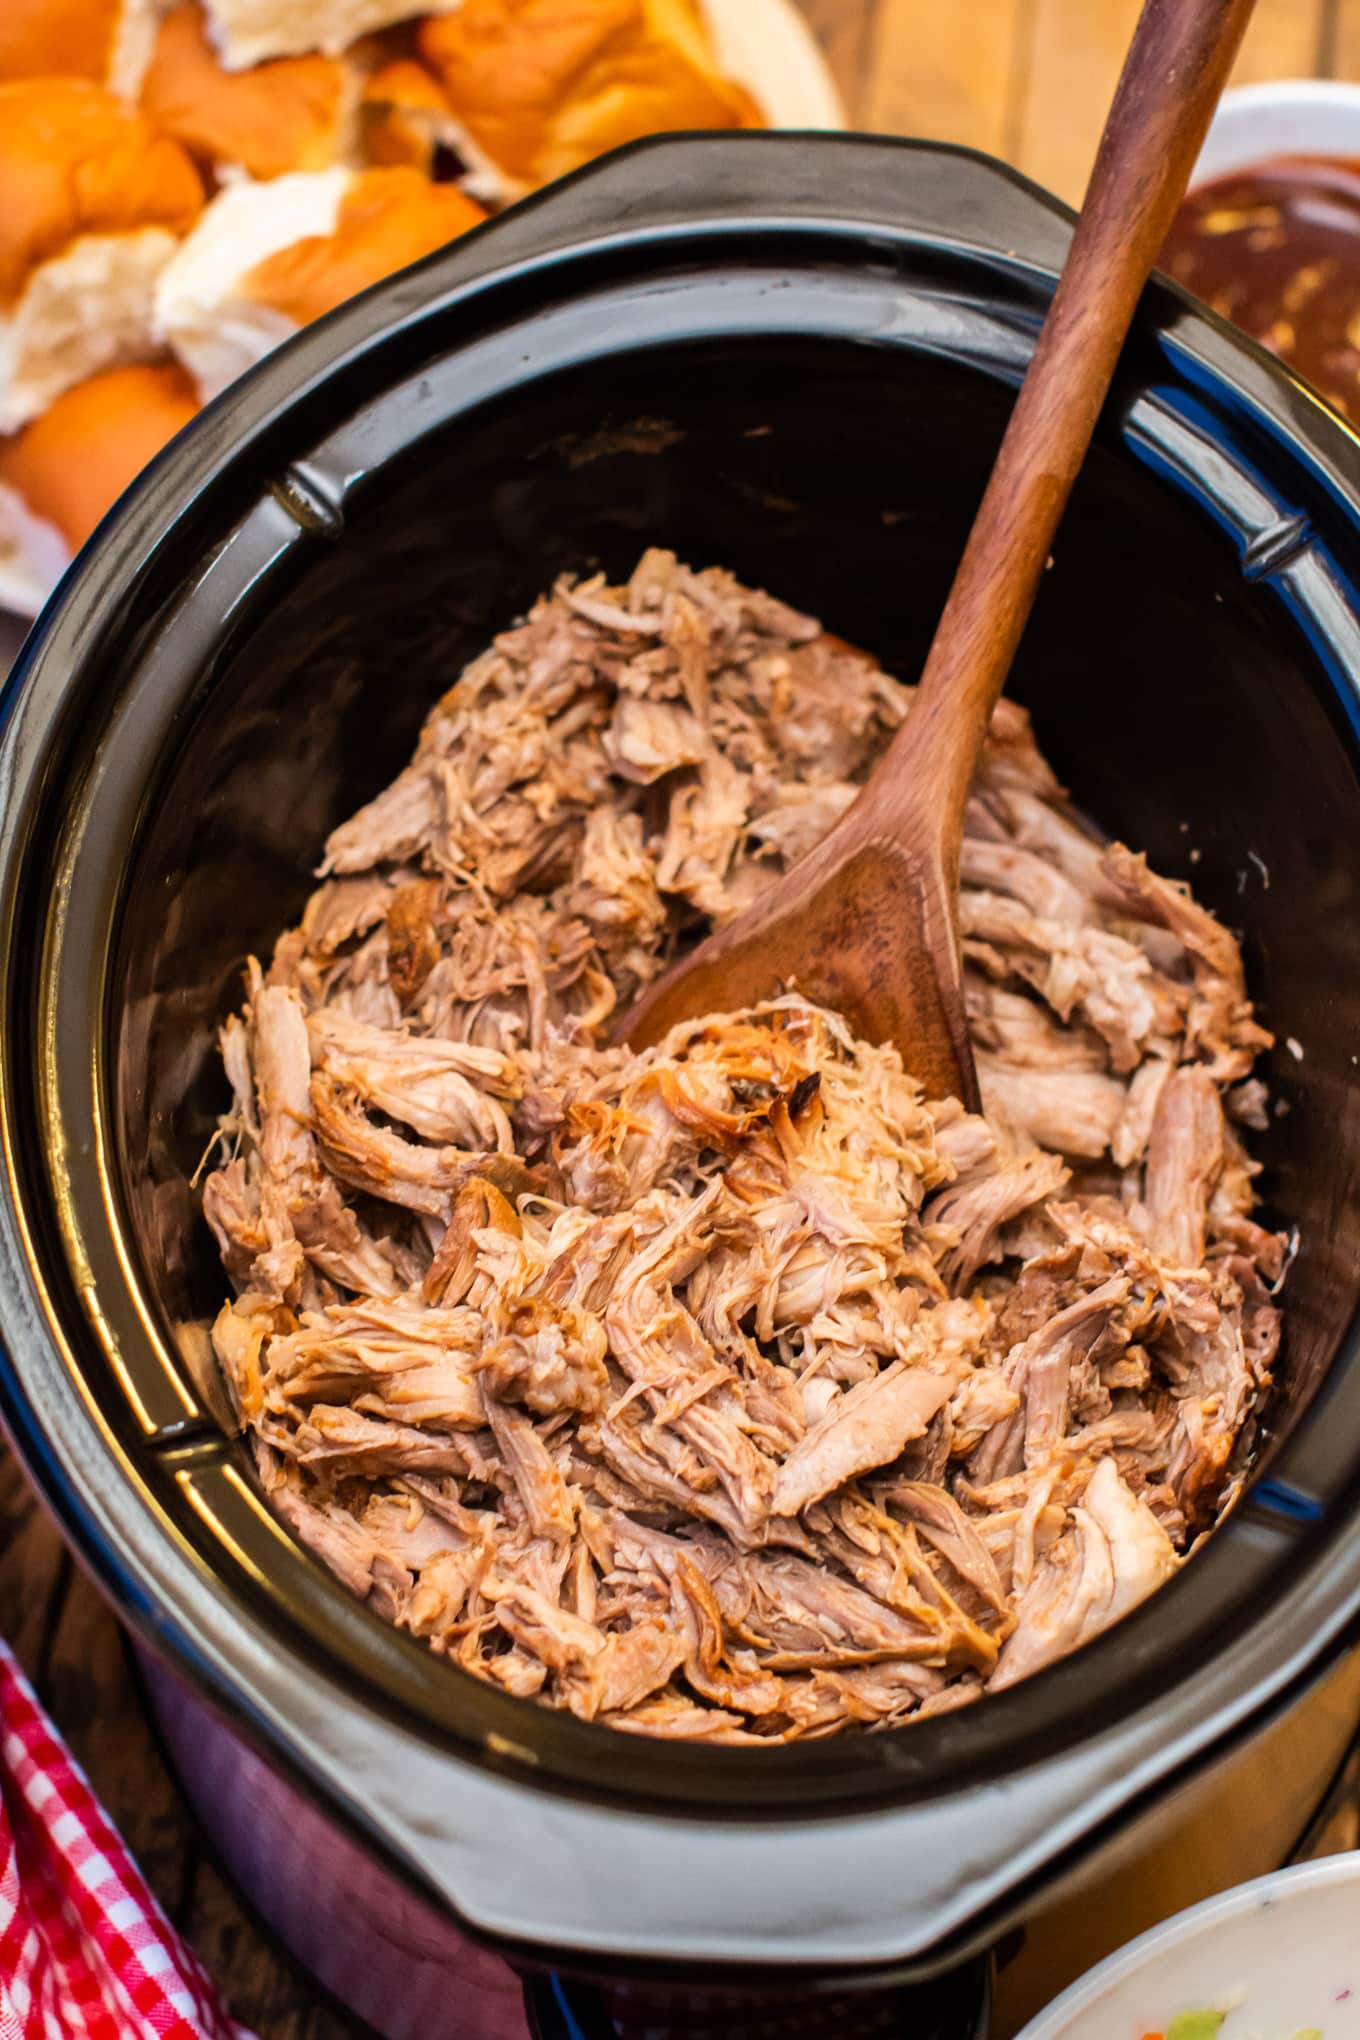 Easy Slow Cooker Pulled Pork Sandwiches The Magical Slow Cooker,How To Make Candles